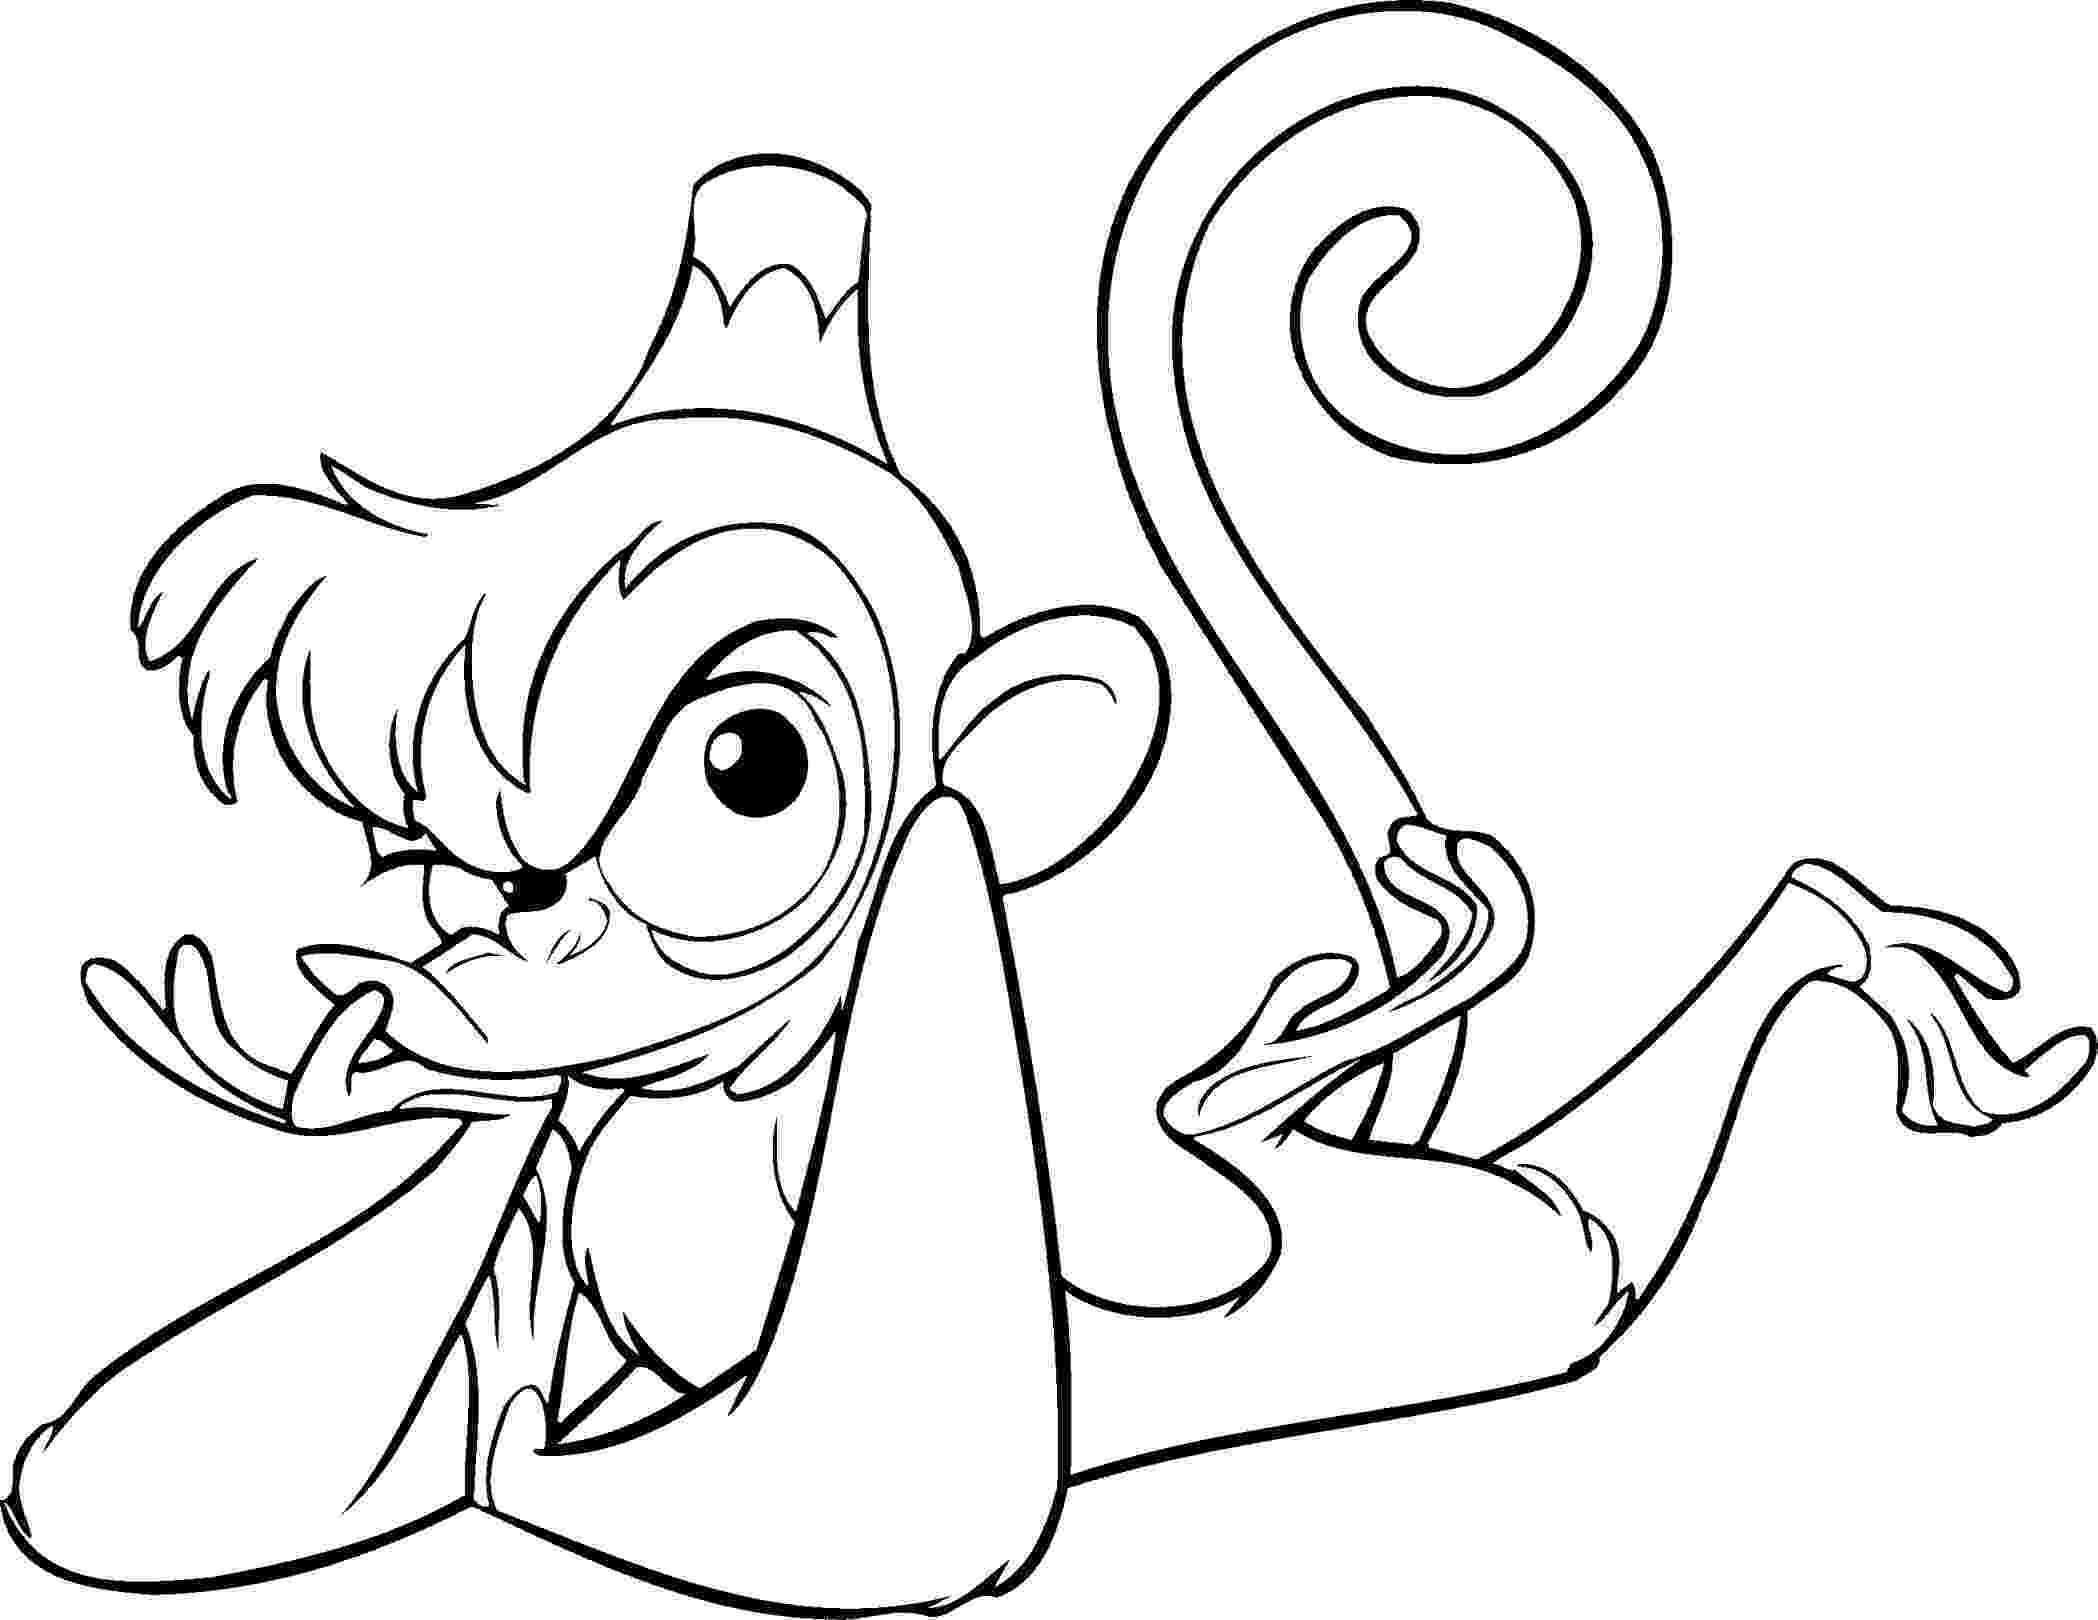 monkey colouring page colouring monkey clipart best colouring page monkey 